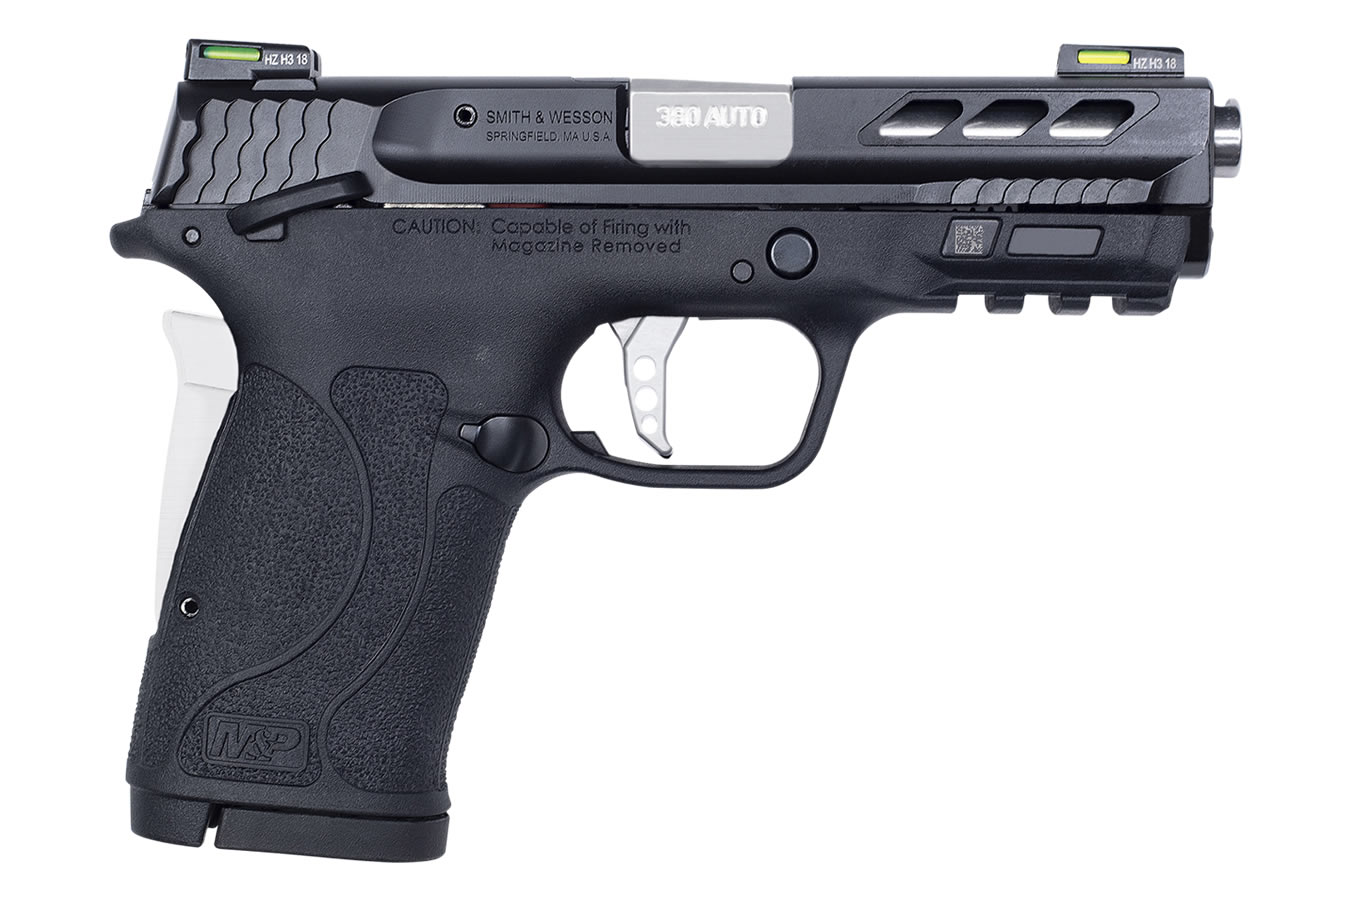 SMITH AND WESSON MP380 SHIELD 380 ACP EZ PERFORMANCE SILVER PORTED BARREL WITH HI-VIZ LITEWAVE H